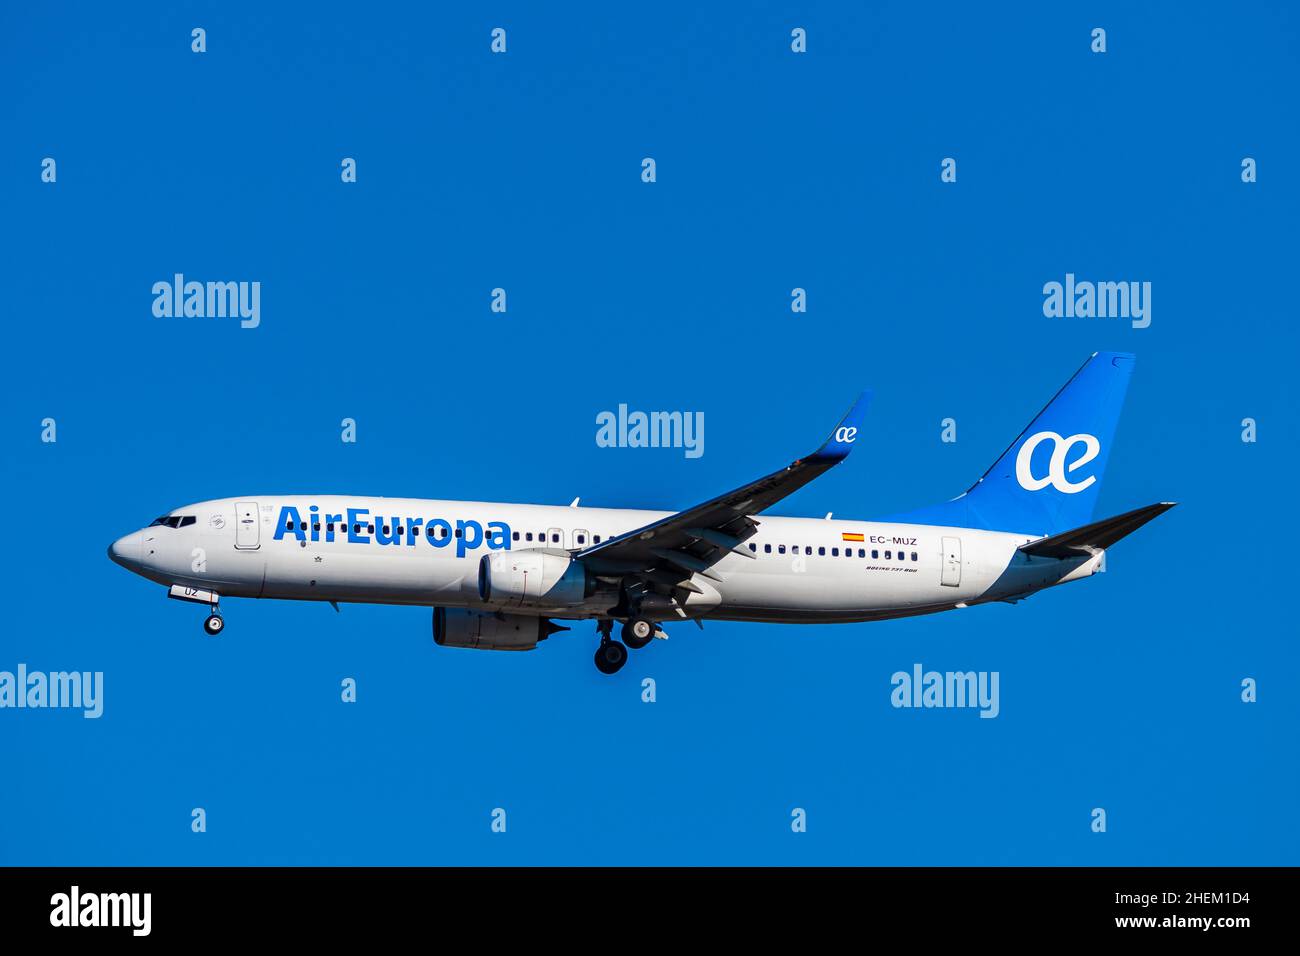 Madrid, Spain - December 31, 2021: Boeing 737-800 passenger aircraft of the airline Air Europa flying before landing against the clear blue sky. Stock Photo